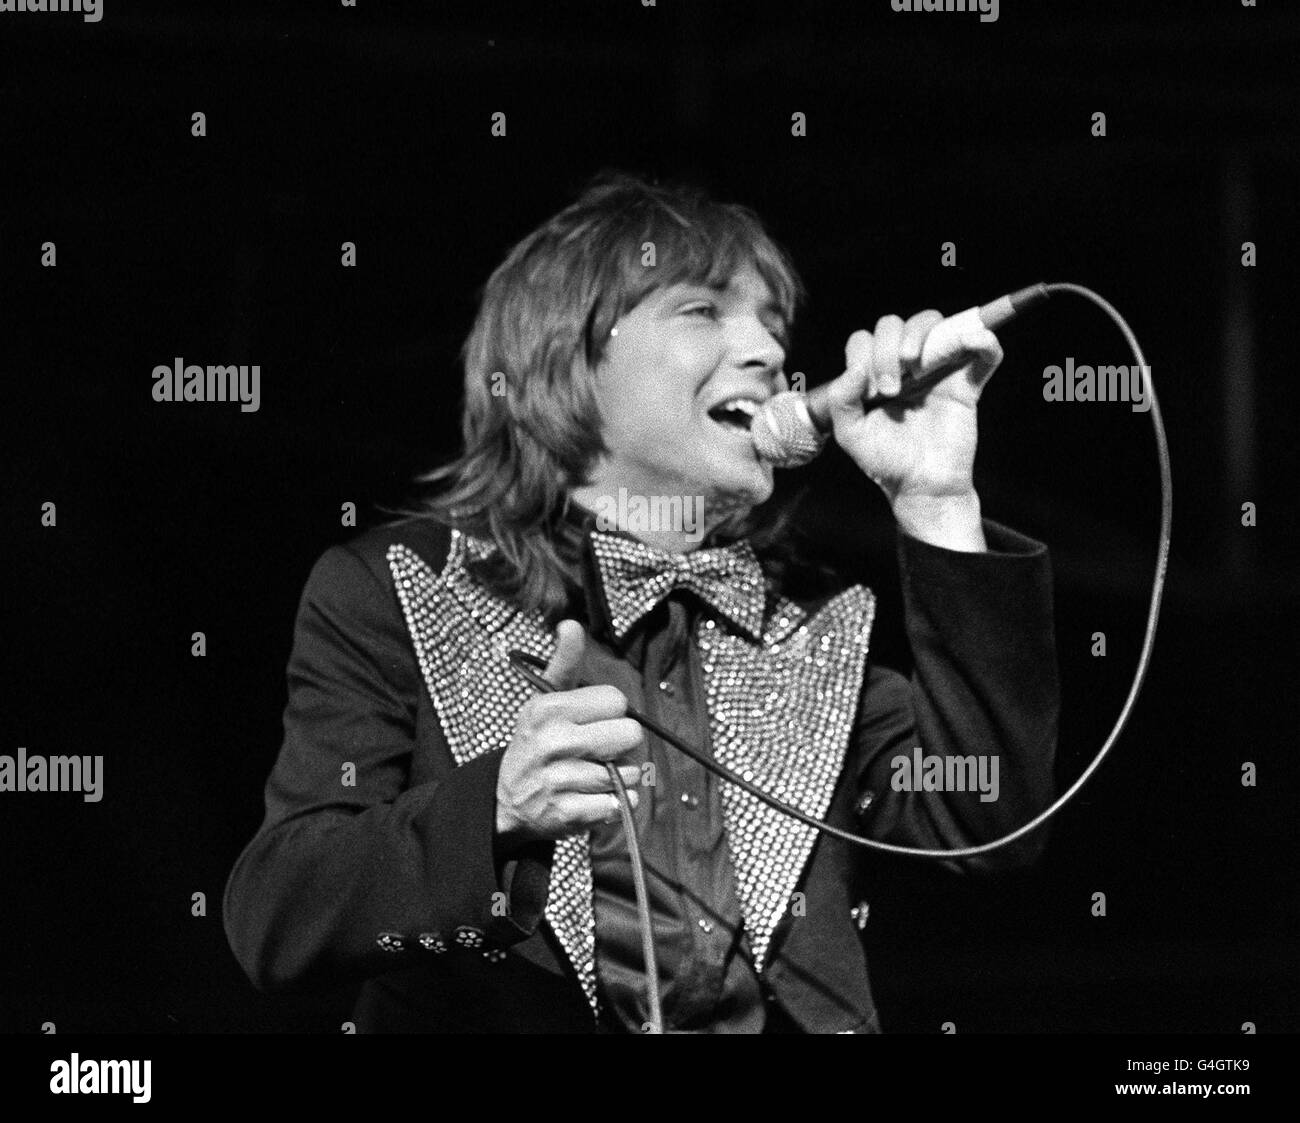 PA NEWS PHOTO 1974 A 1974 FILE PICTURE OF DAVID CASSIDY IN CONCERT Stock Photo